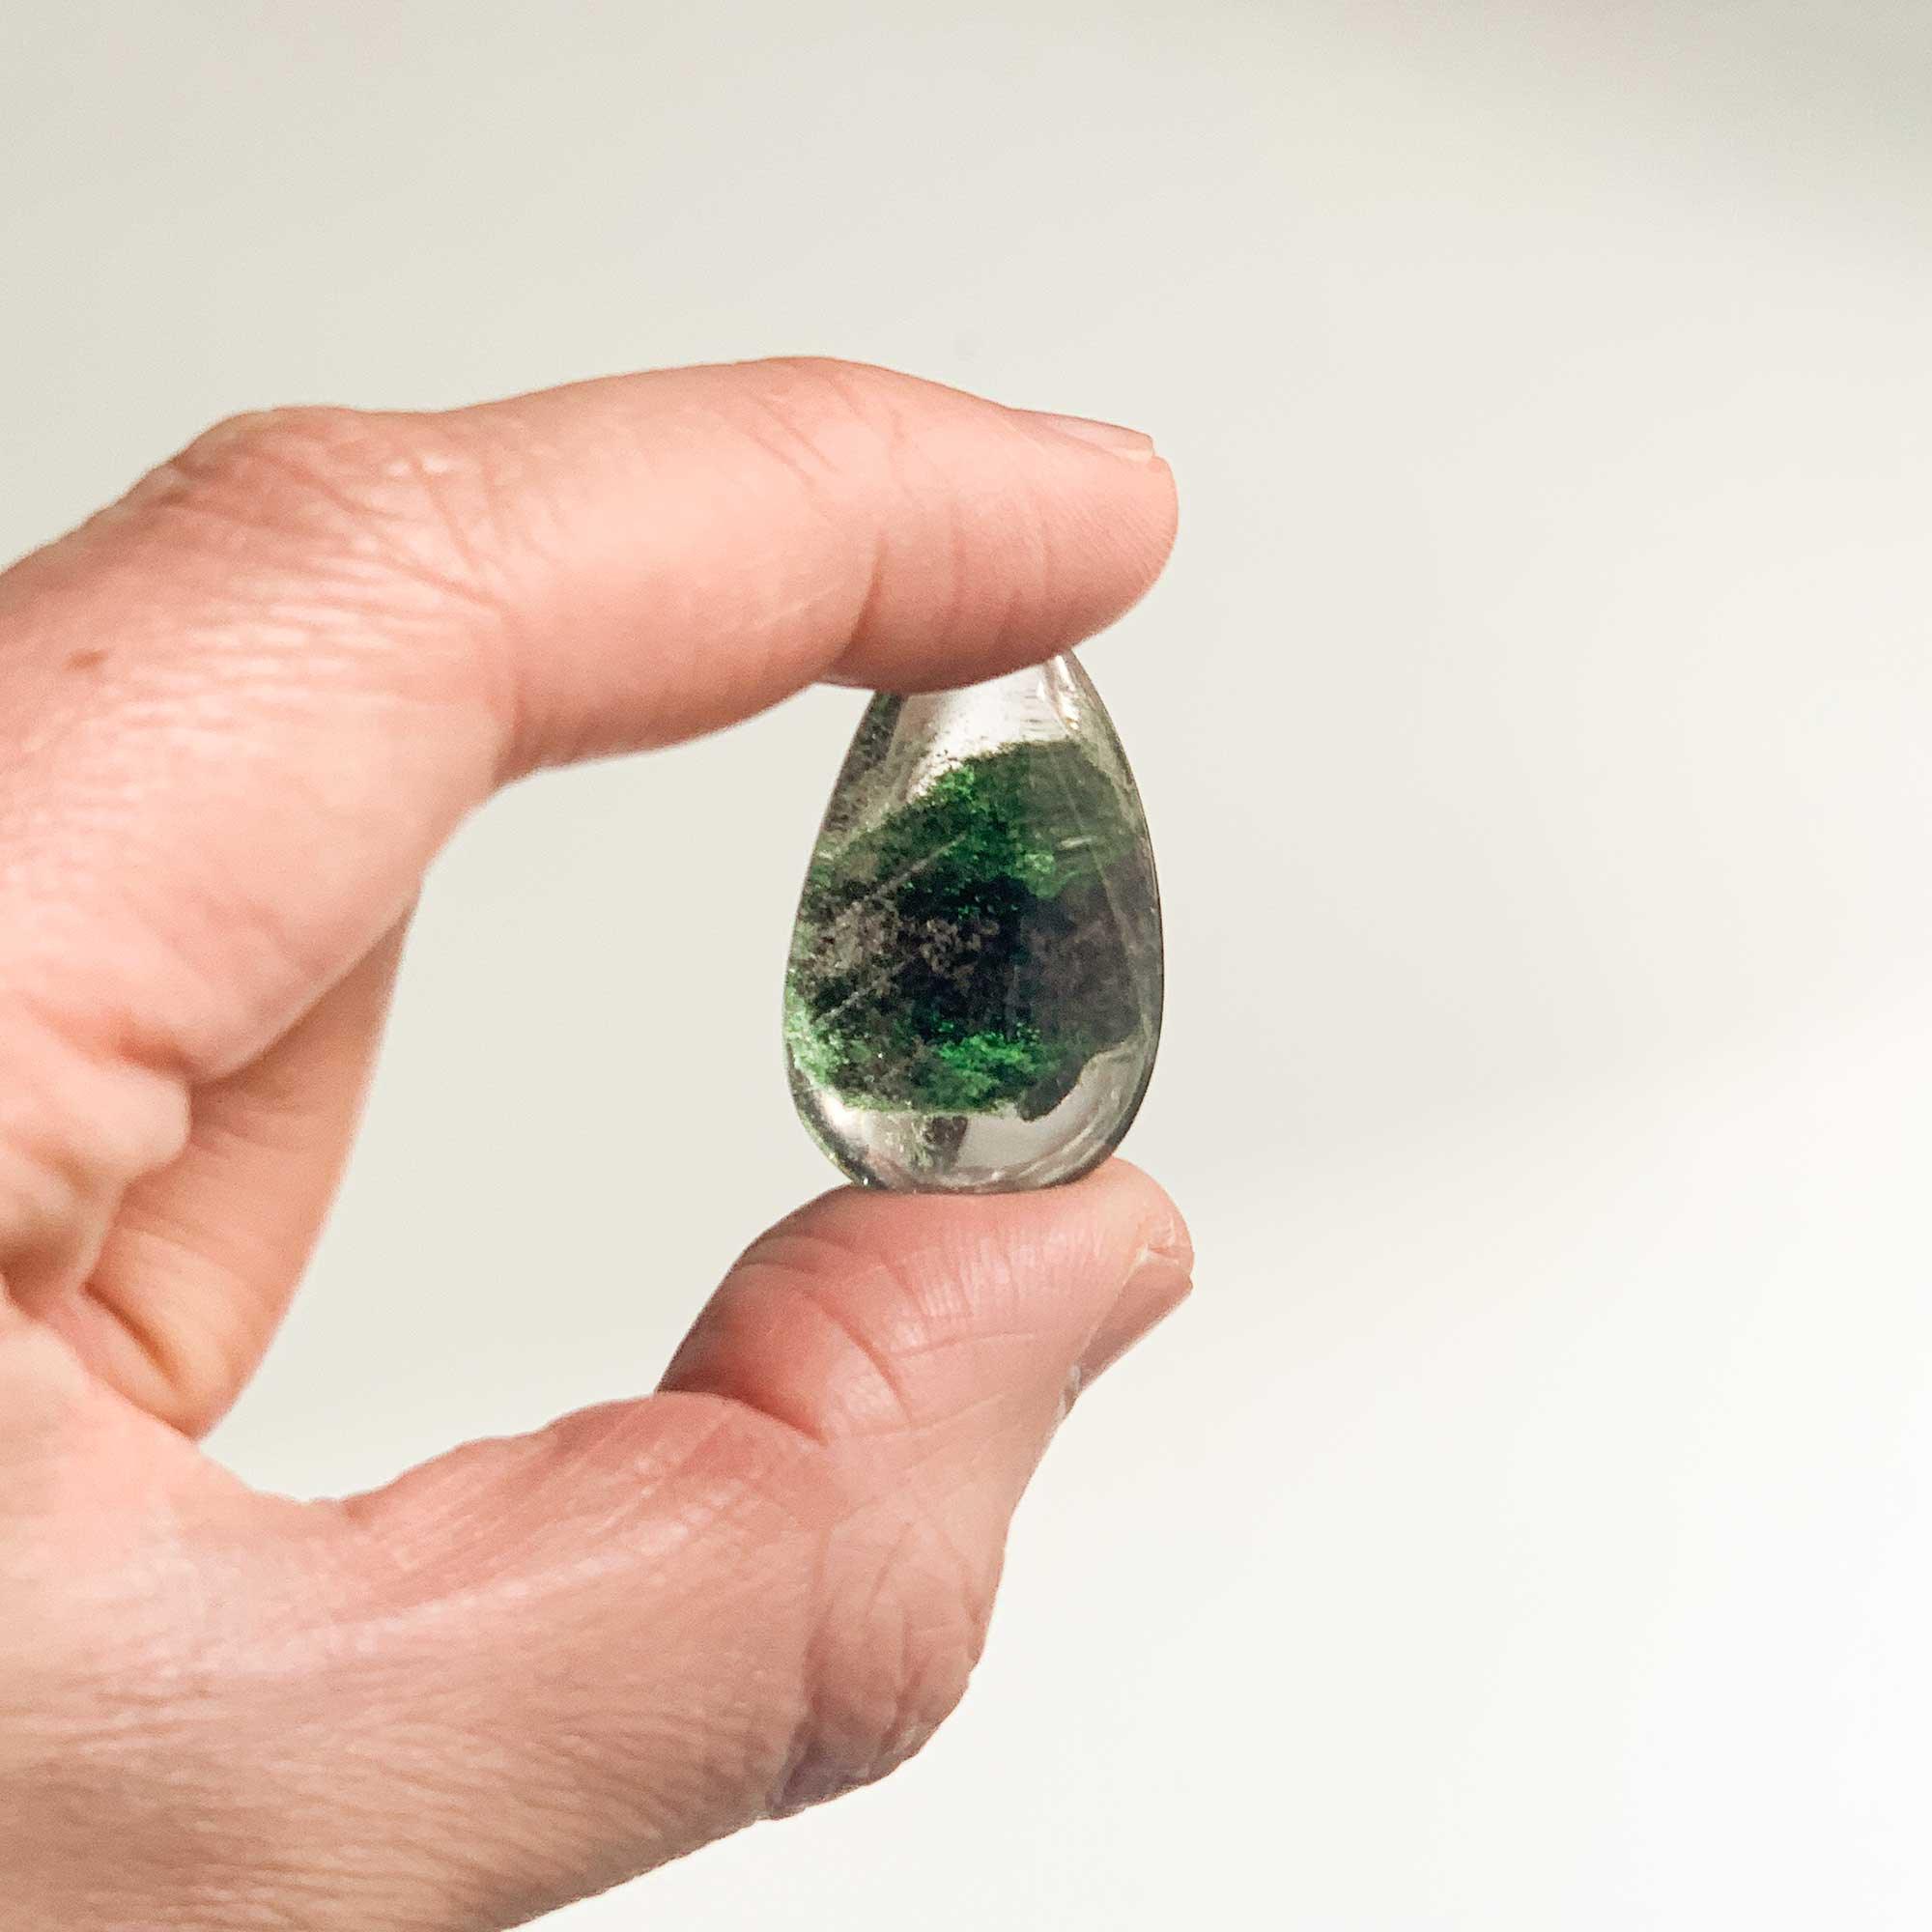 holding mini green ghost crystal